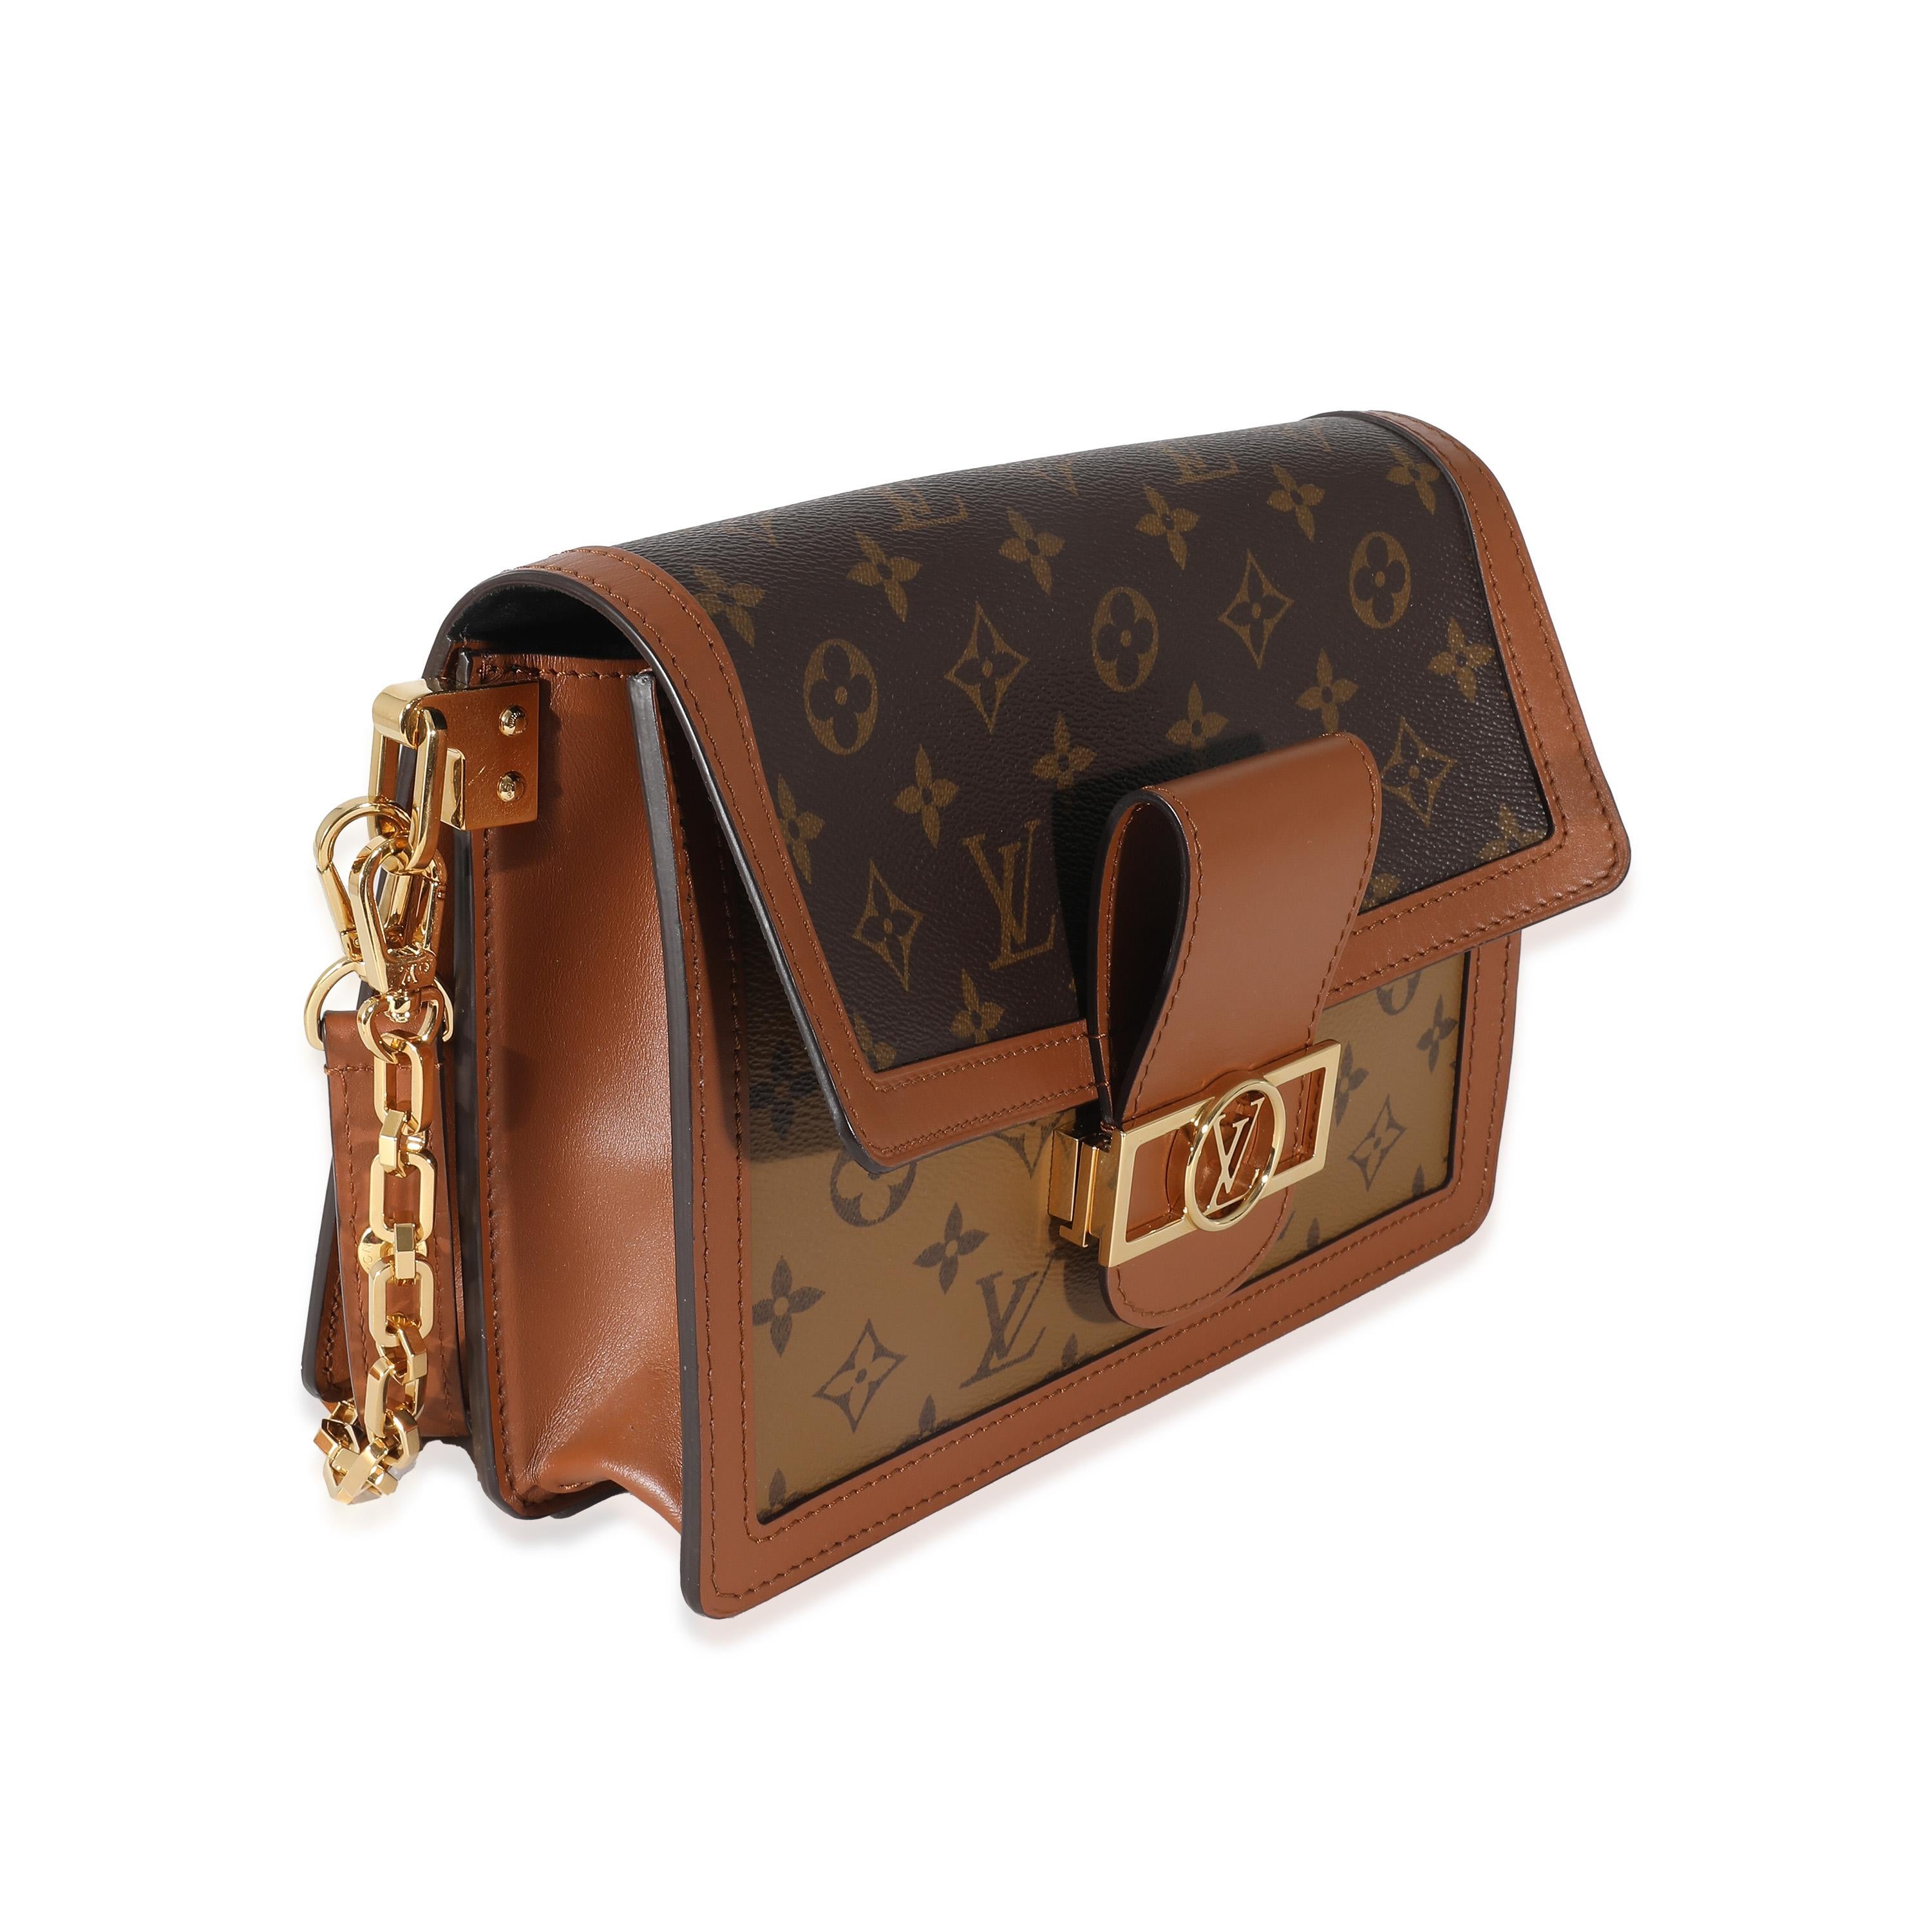 Listing Title: Louis Vuitton Reverse Monogram Canvas Dauphine MM
SKU: 136624
Condition: Pre-owned 
Handbag Condition: Excellent
Condition Comments: Item is in excellent condition and displays light signs of wear.  Light scuffing along interior.